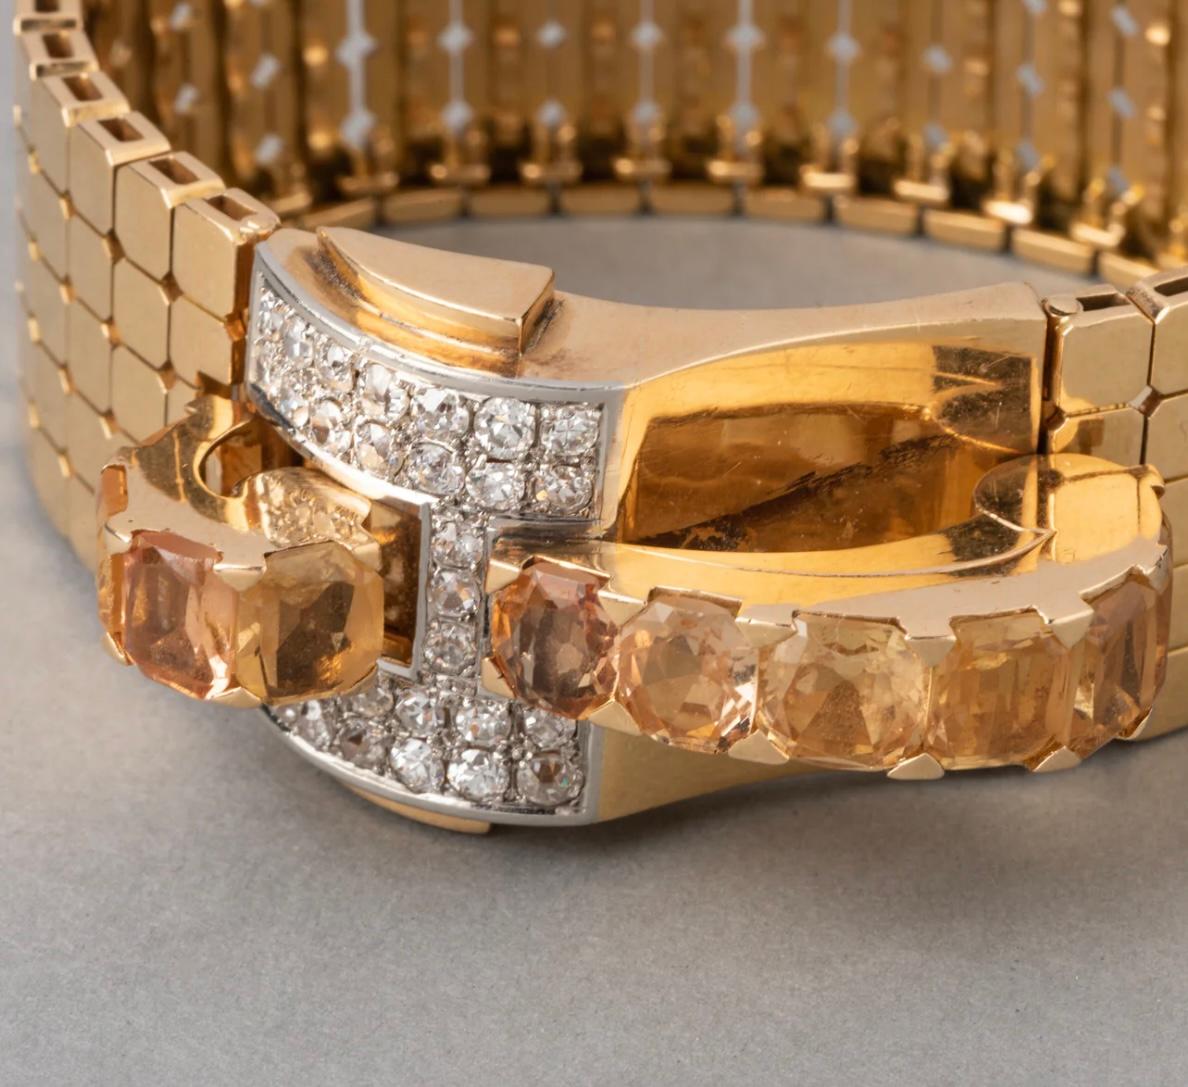 This is a French Retro Diamond and Citrine Buckle Bracelet from the 1940s. It is crafted from 18k yellow gold with 4 carats of Citrines and 2.5 carats of European Cut Diamonds. The bracelet weighs 79.10 grams and is definitely a statement piece!